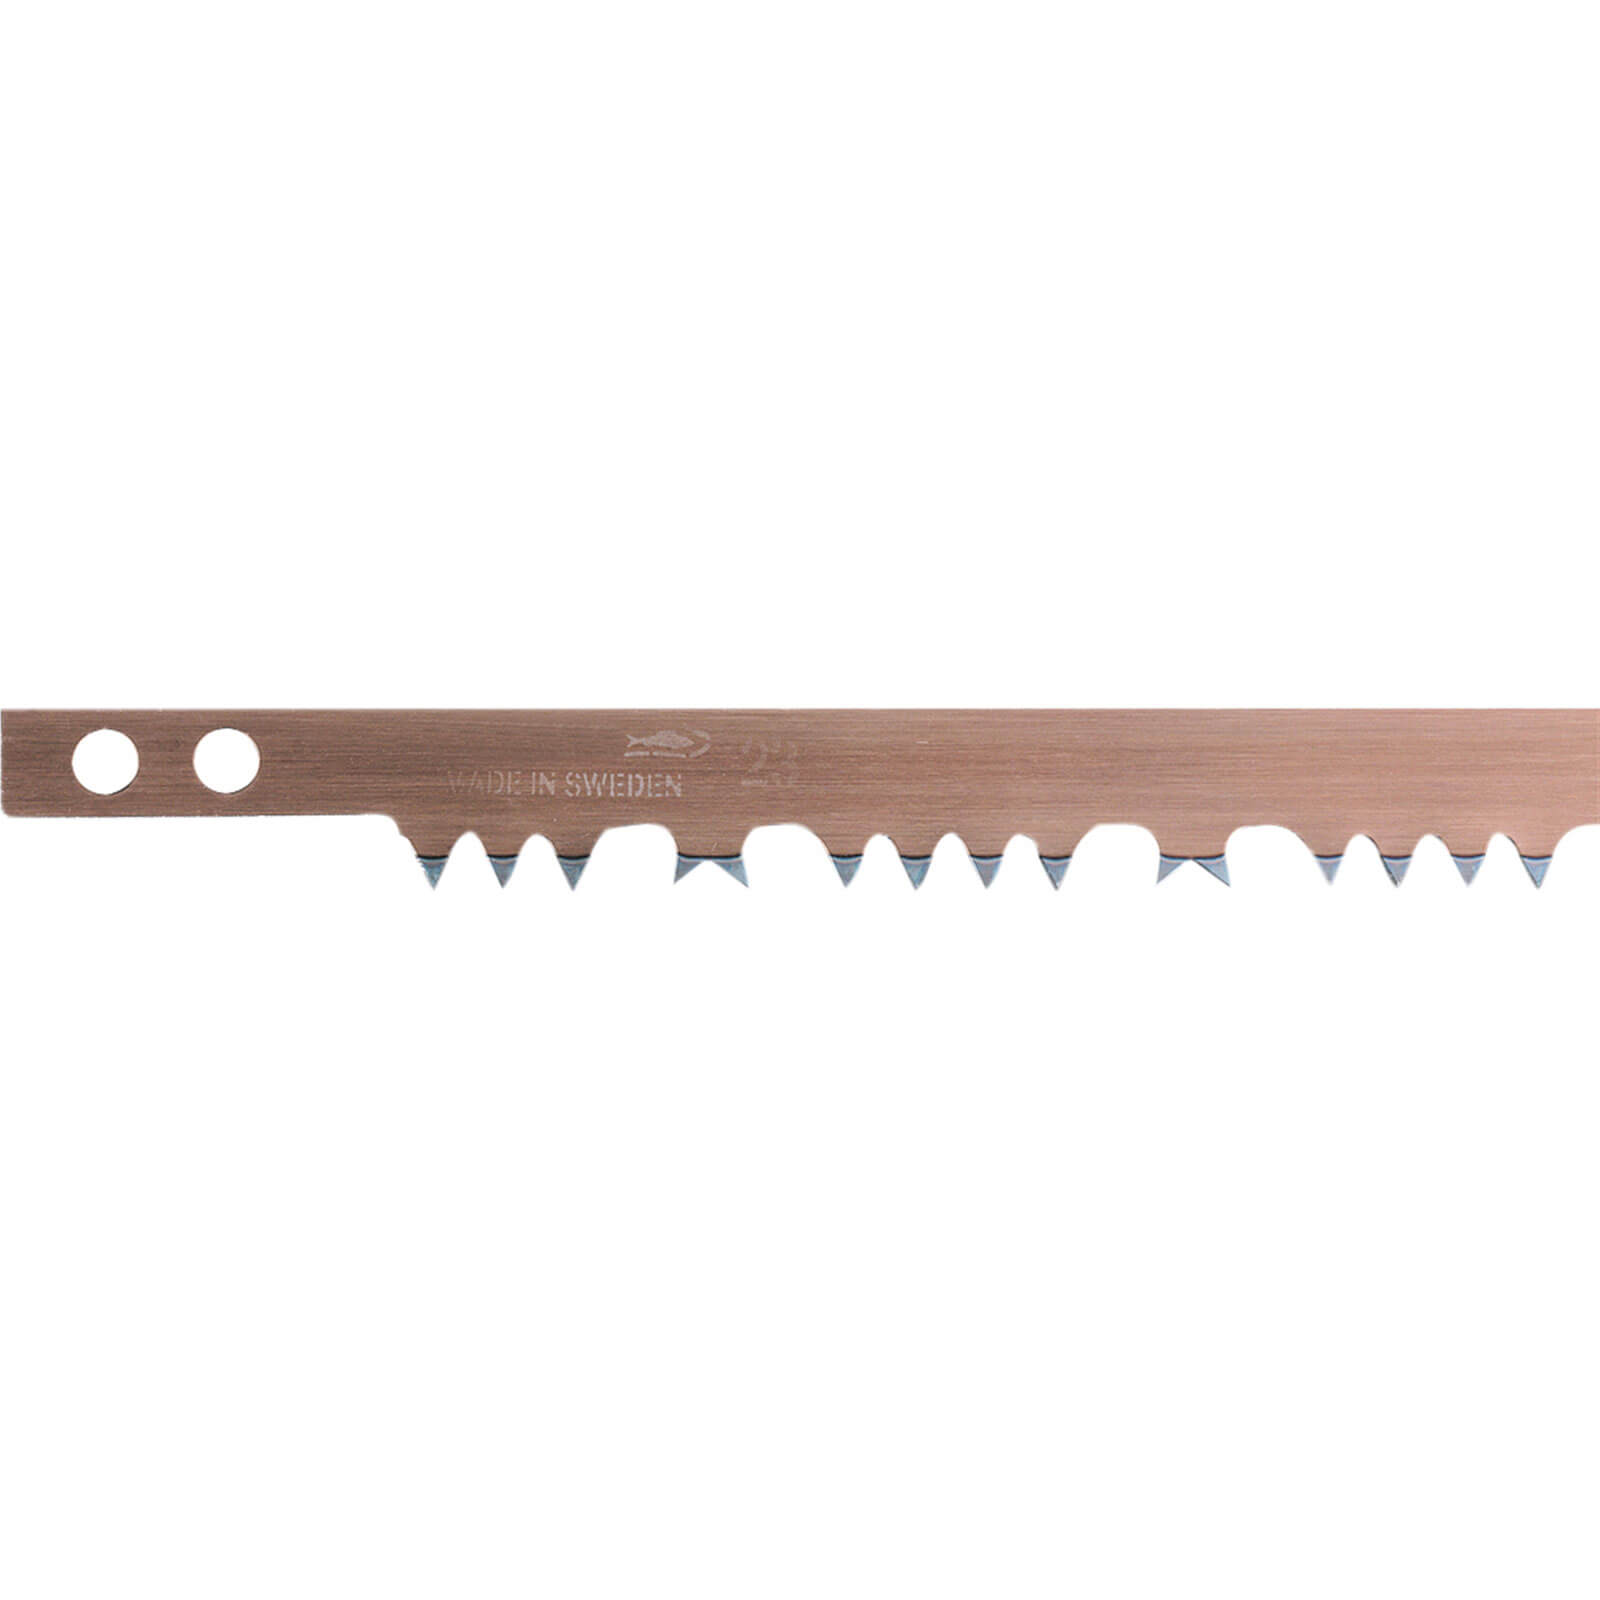 Bahco Raker Tooth Hard Point Bowsaw Blade 15&quot / 380mm For Green Wood